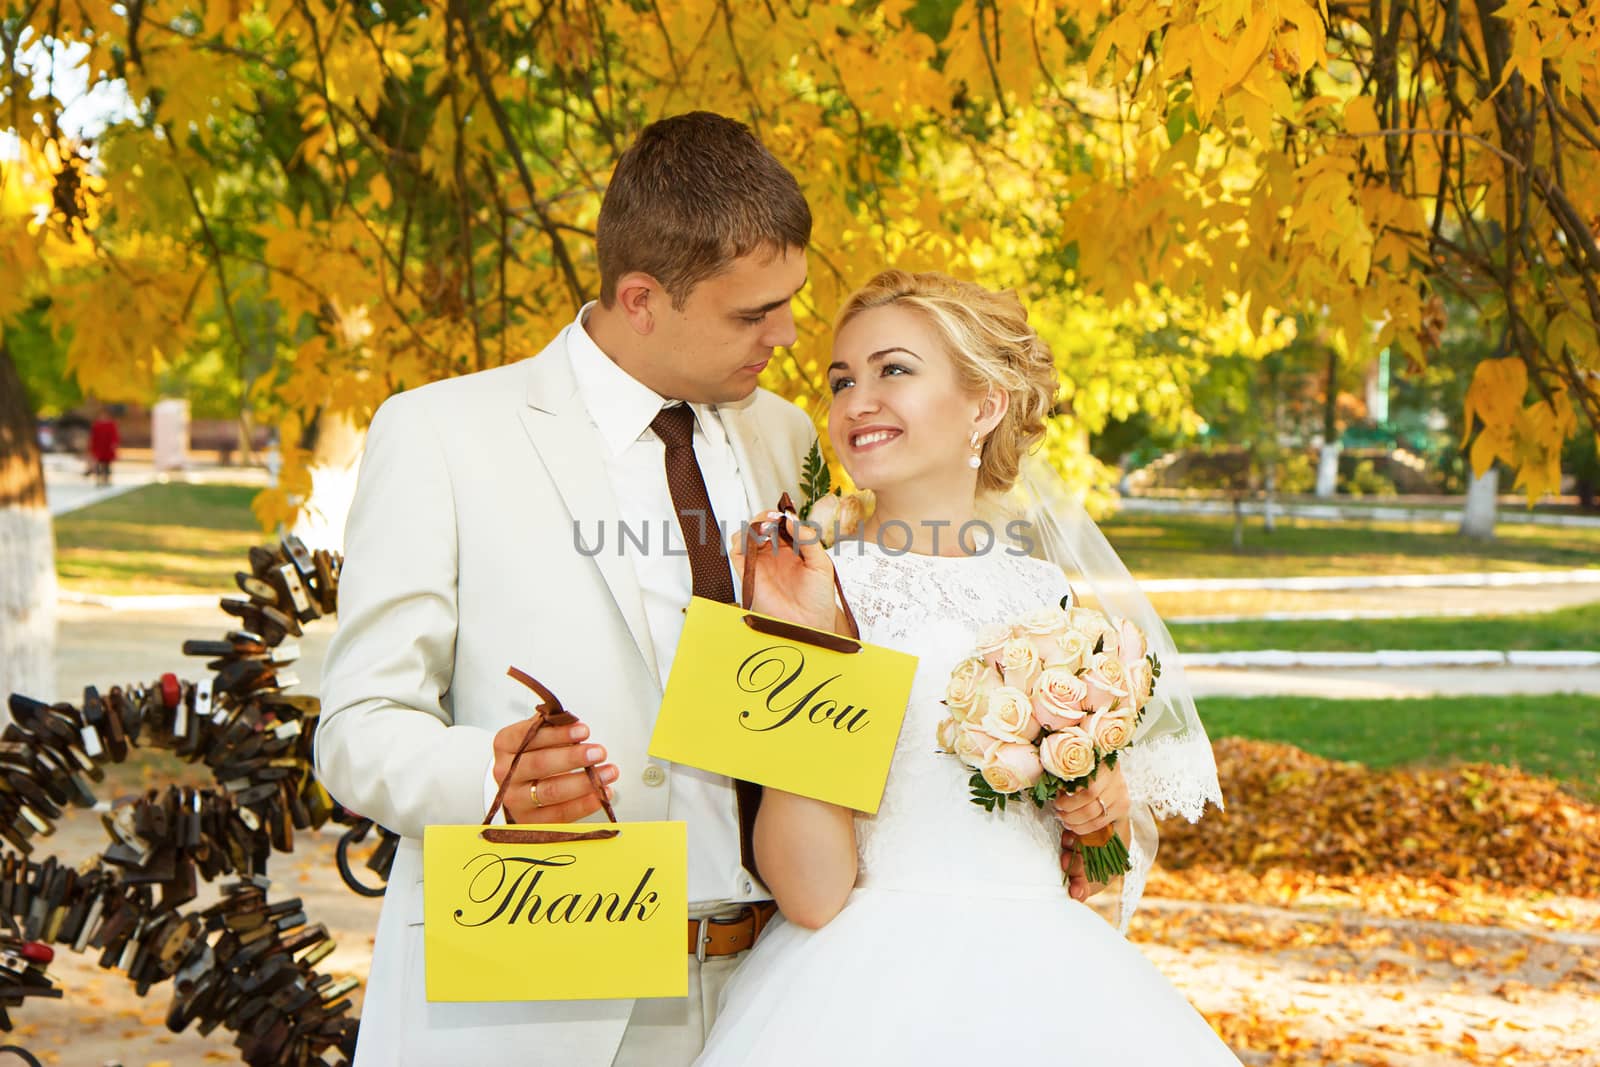 Beautiful young bride and groom in love. Couple with signs with the words "Thank" and "You". Thank You